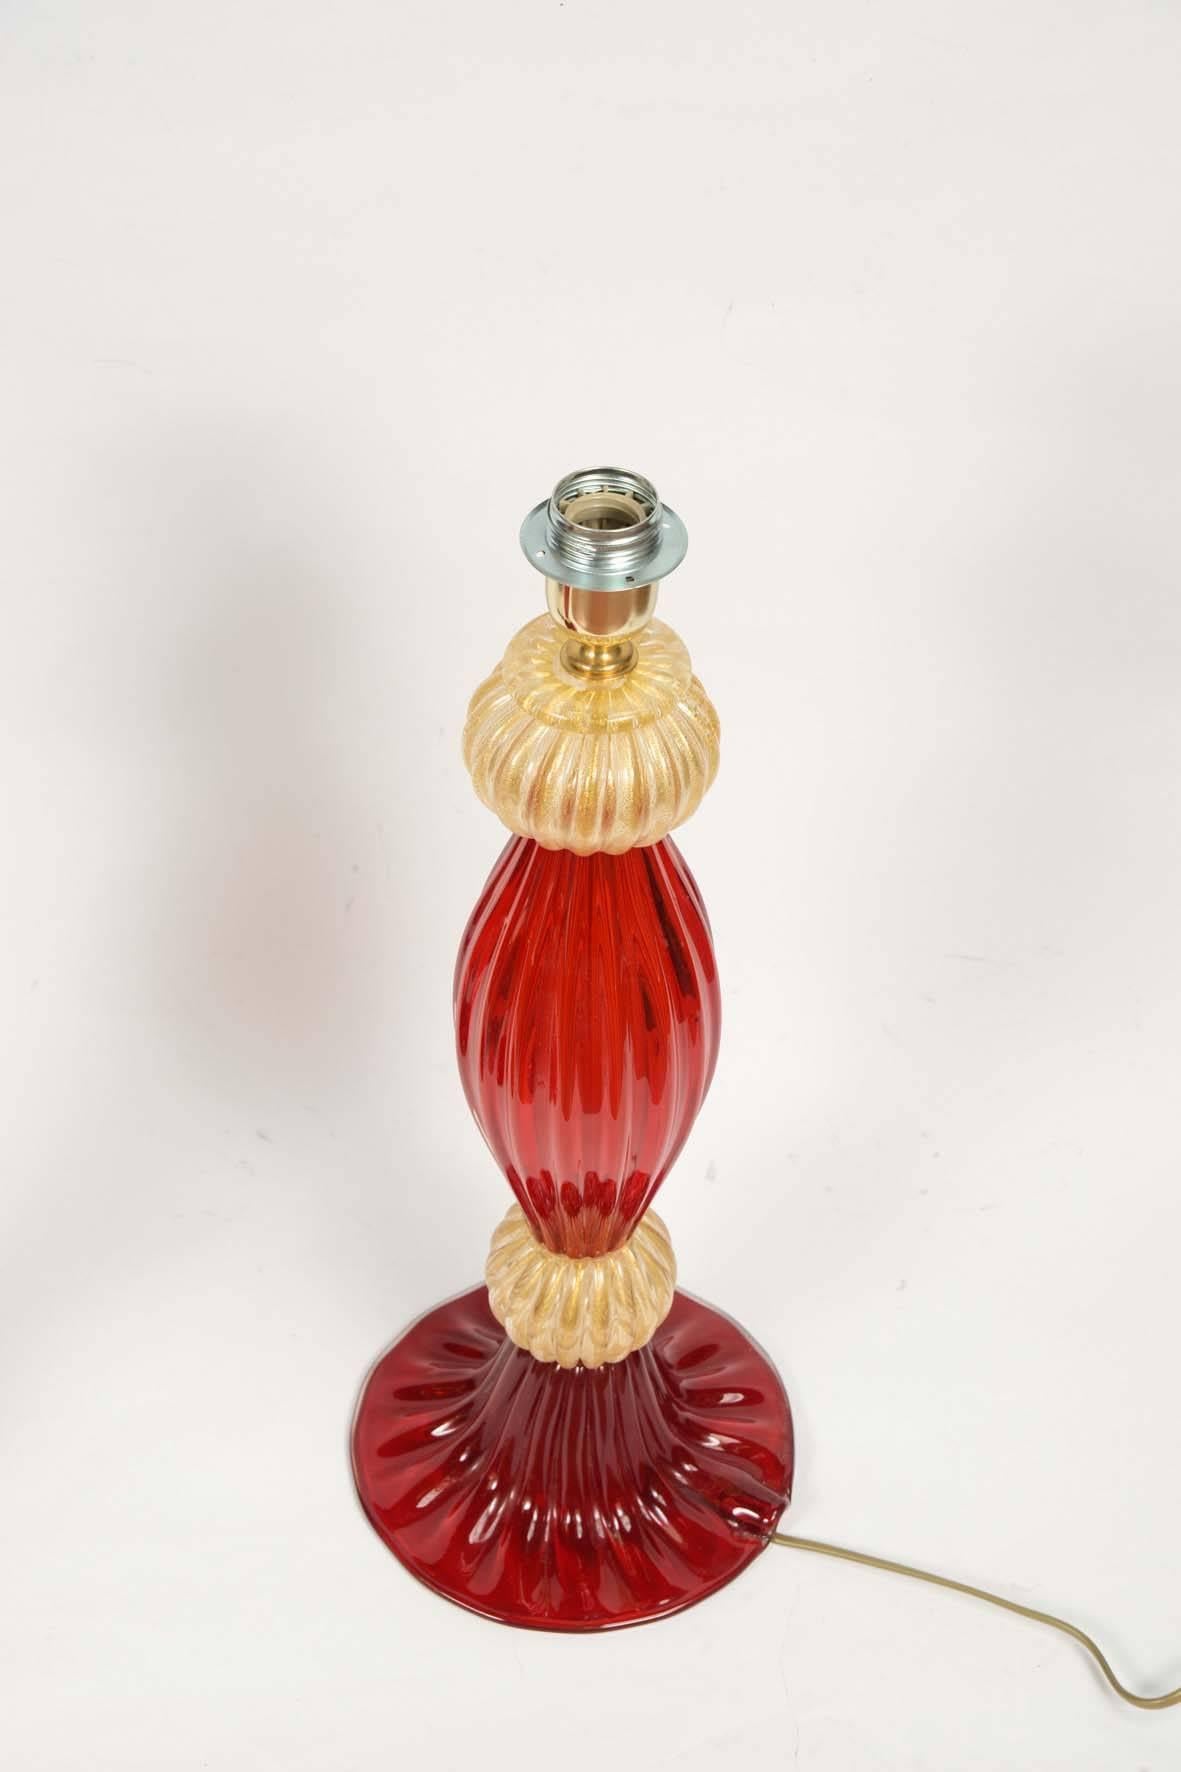 Pair of Table Lamps in Murano Glass 2